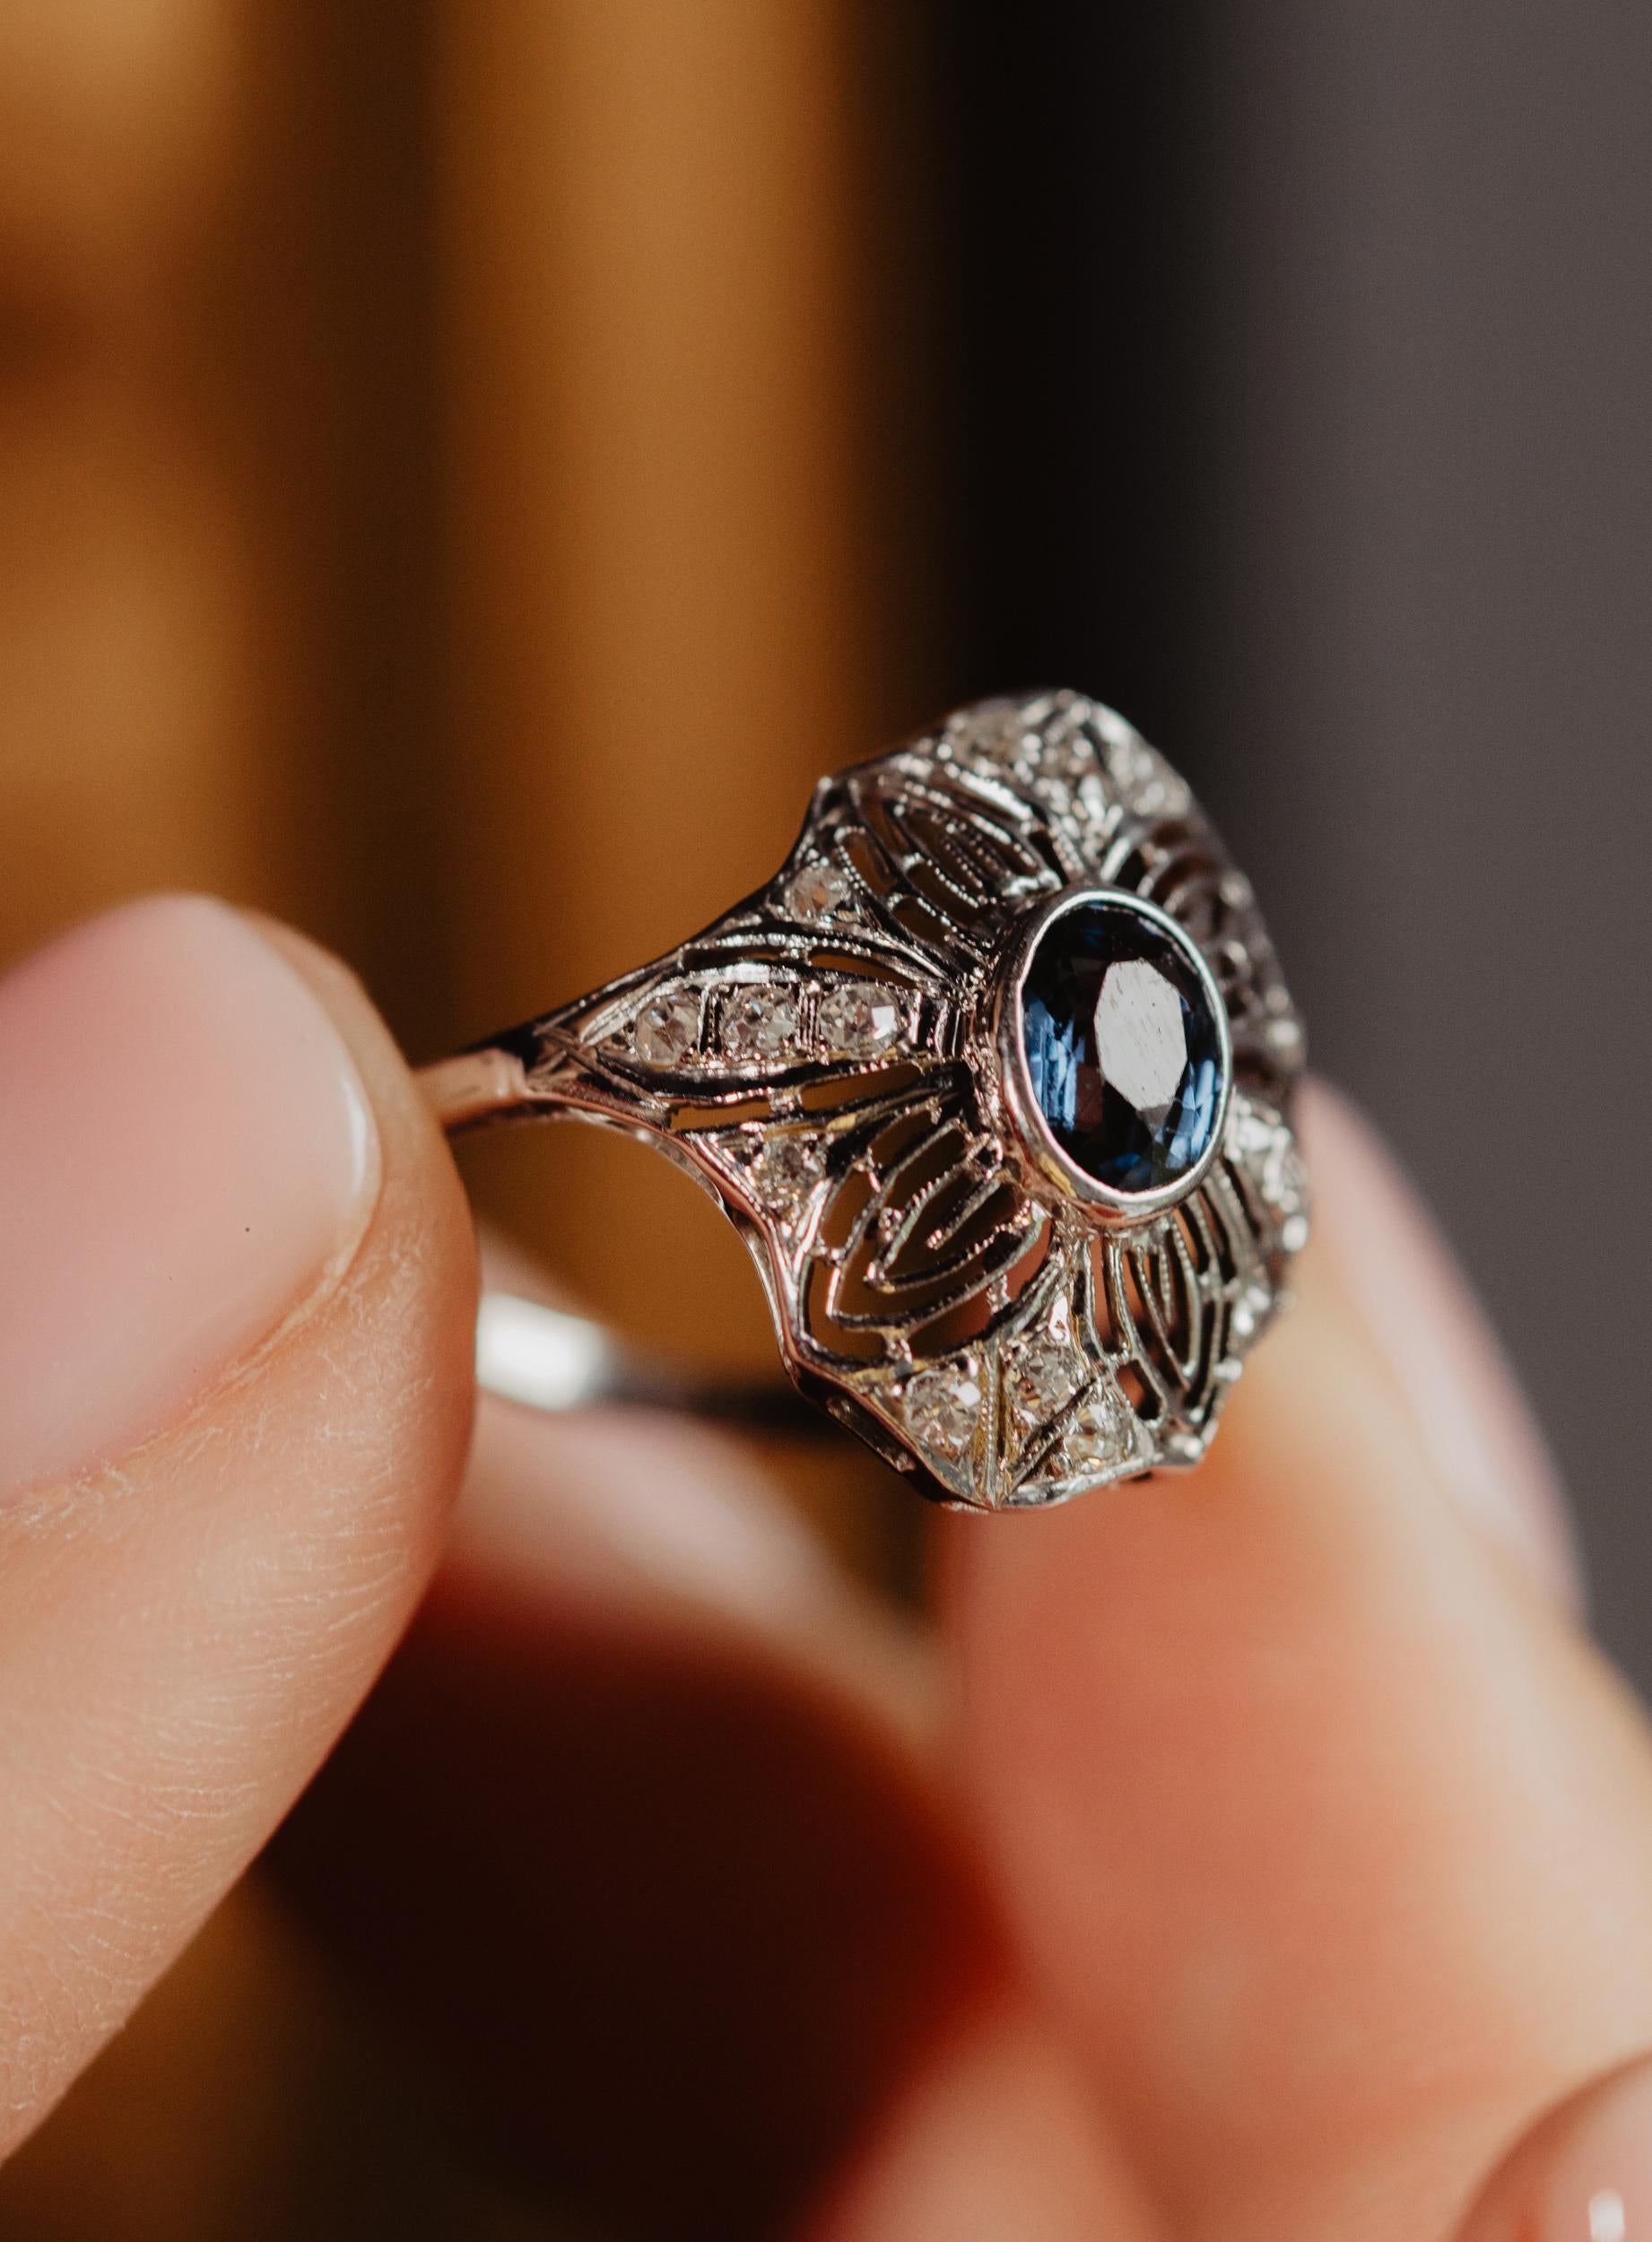 A stunning antique Edwardian era platinum ring set with a natural untreated sapphire and sparkling diamonds! This classy and heavy ring dates to the early 1900's and comes from the Central Europe.

A typical example of Edwardian era delicate